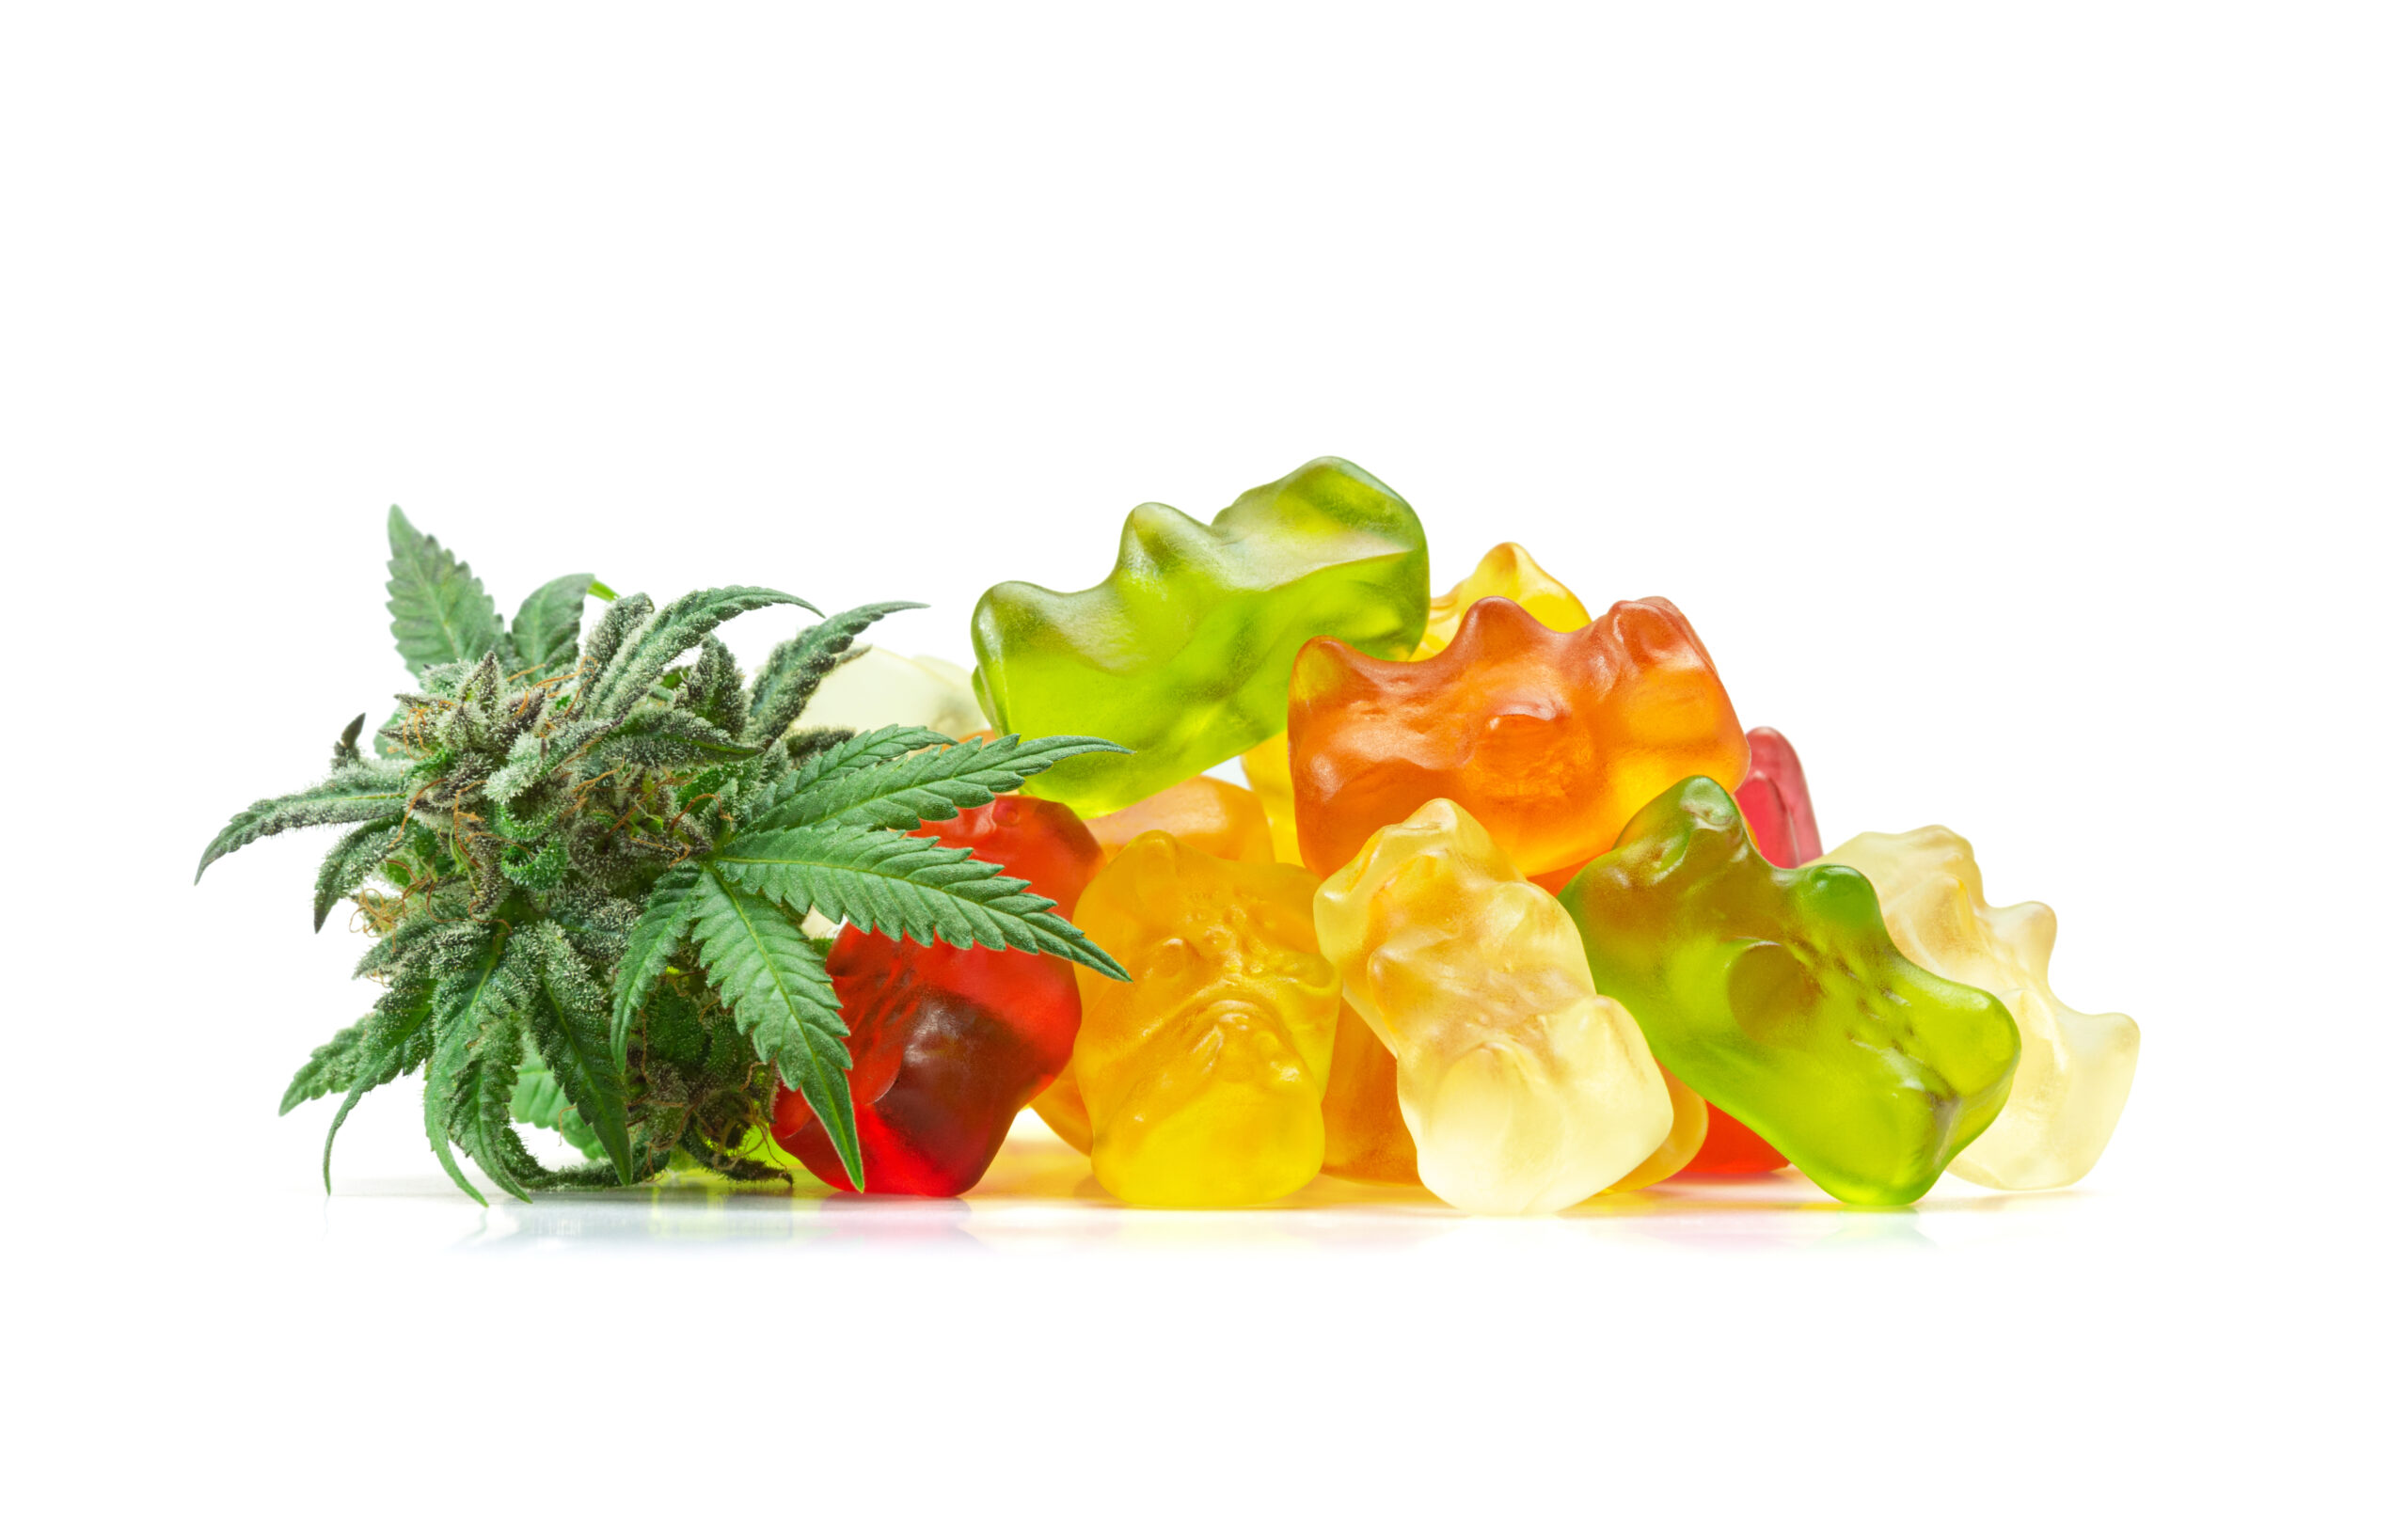 What You Need to Know About Cannabis Edibles: A Beginner’s Guide